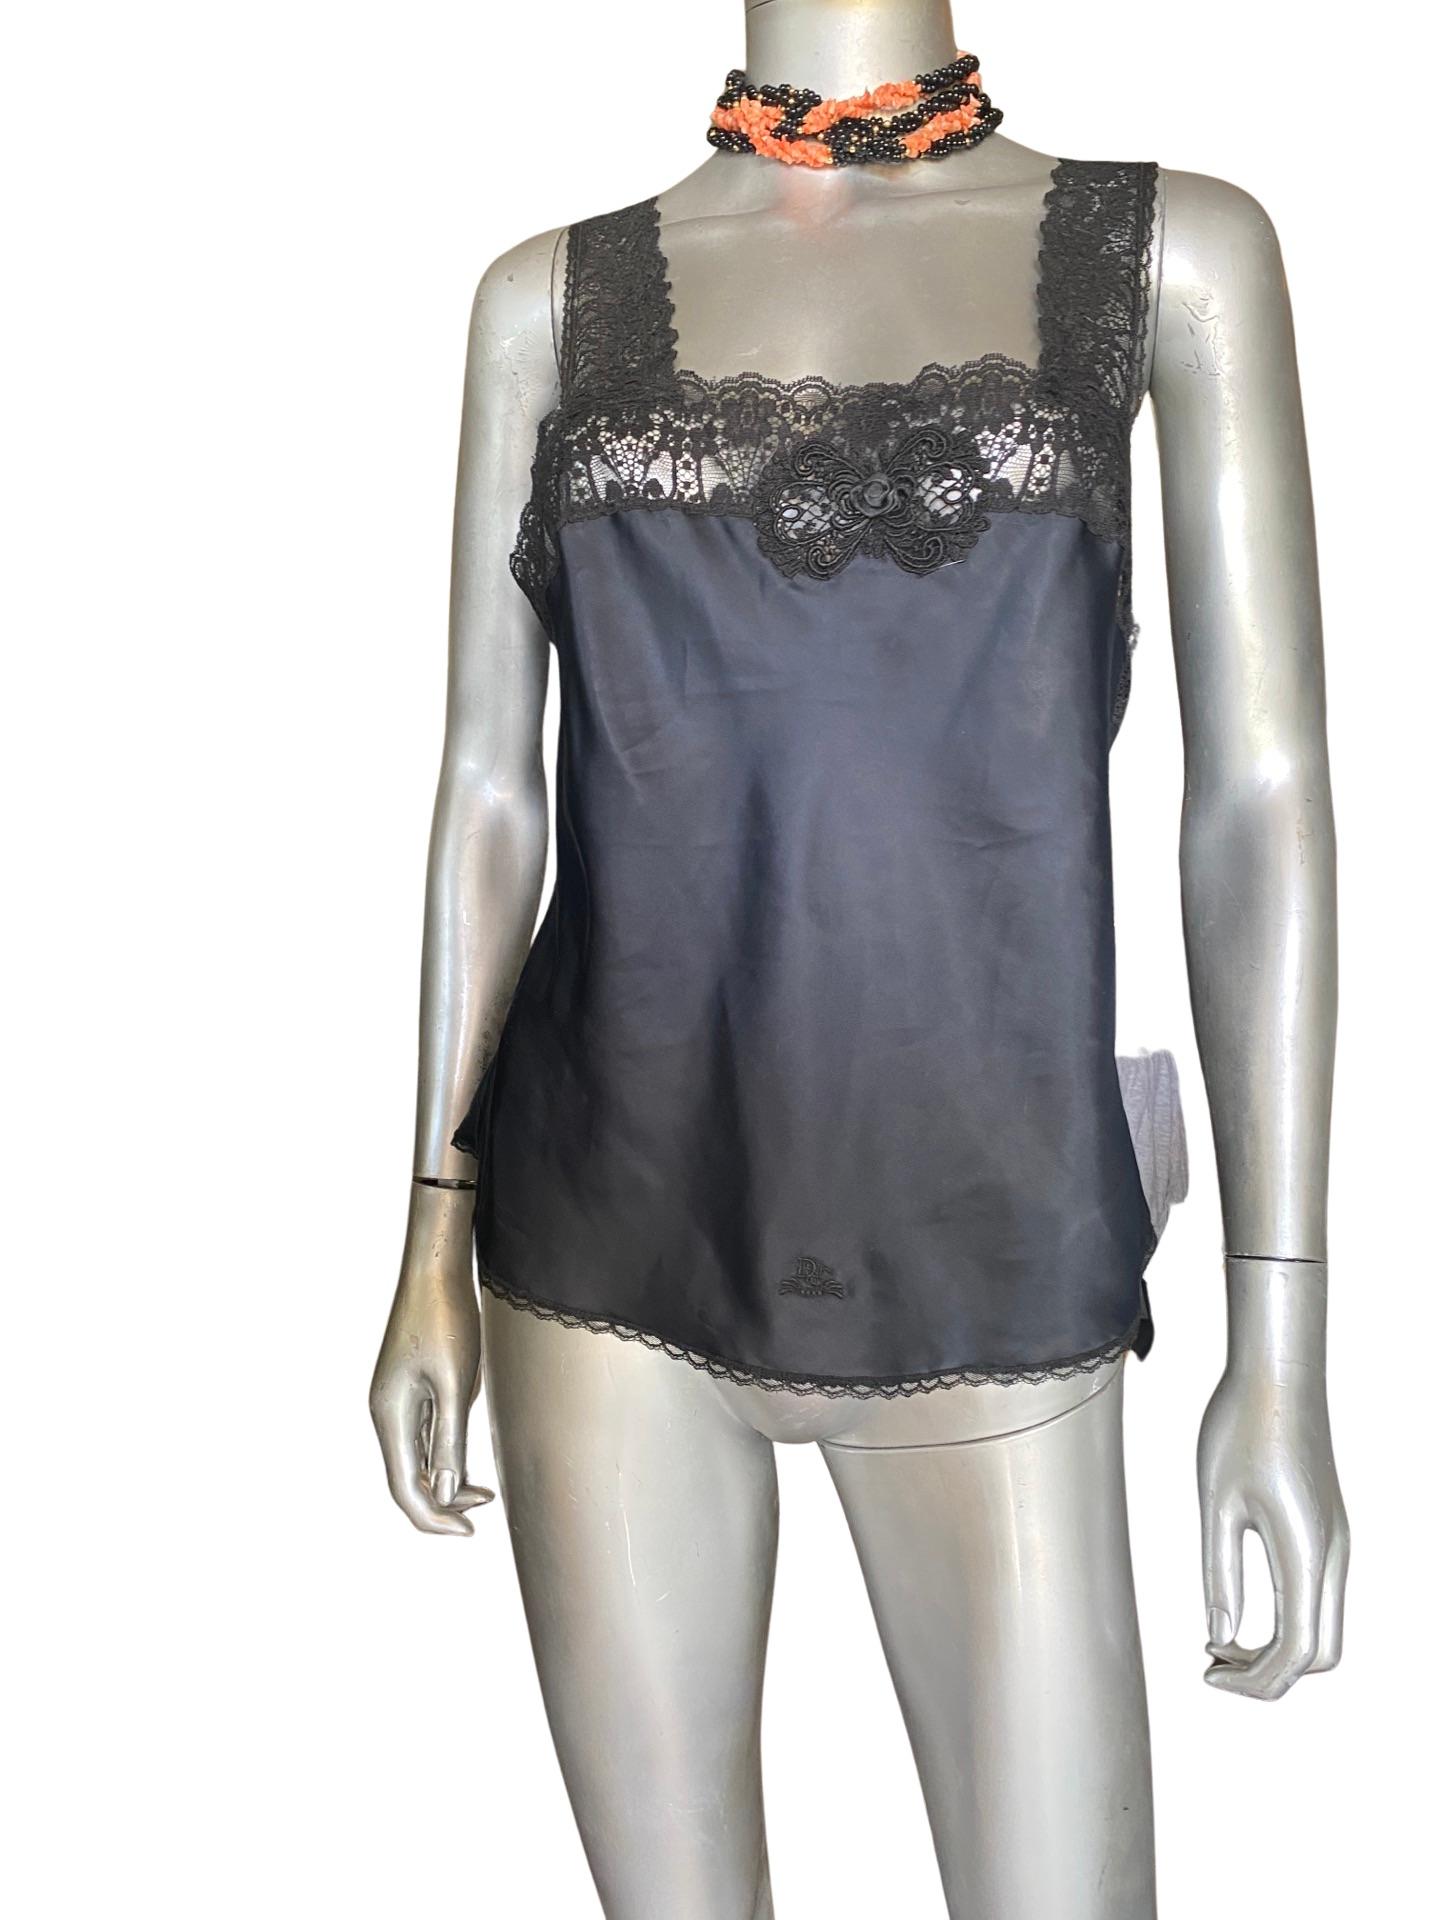 Vintage Christian Dior Black Camisole Blouse w/ Lace Trim Size Medium In Good Condition For Sale In Palm Springs, CA